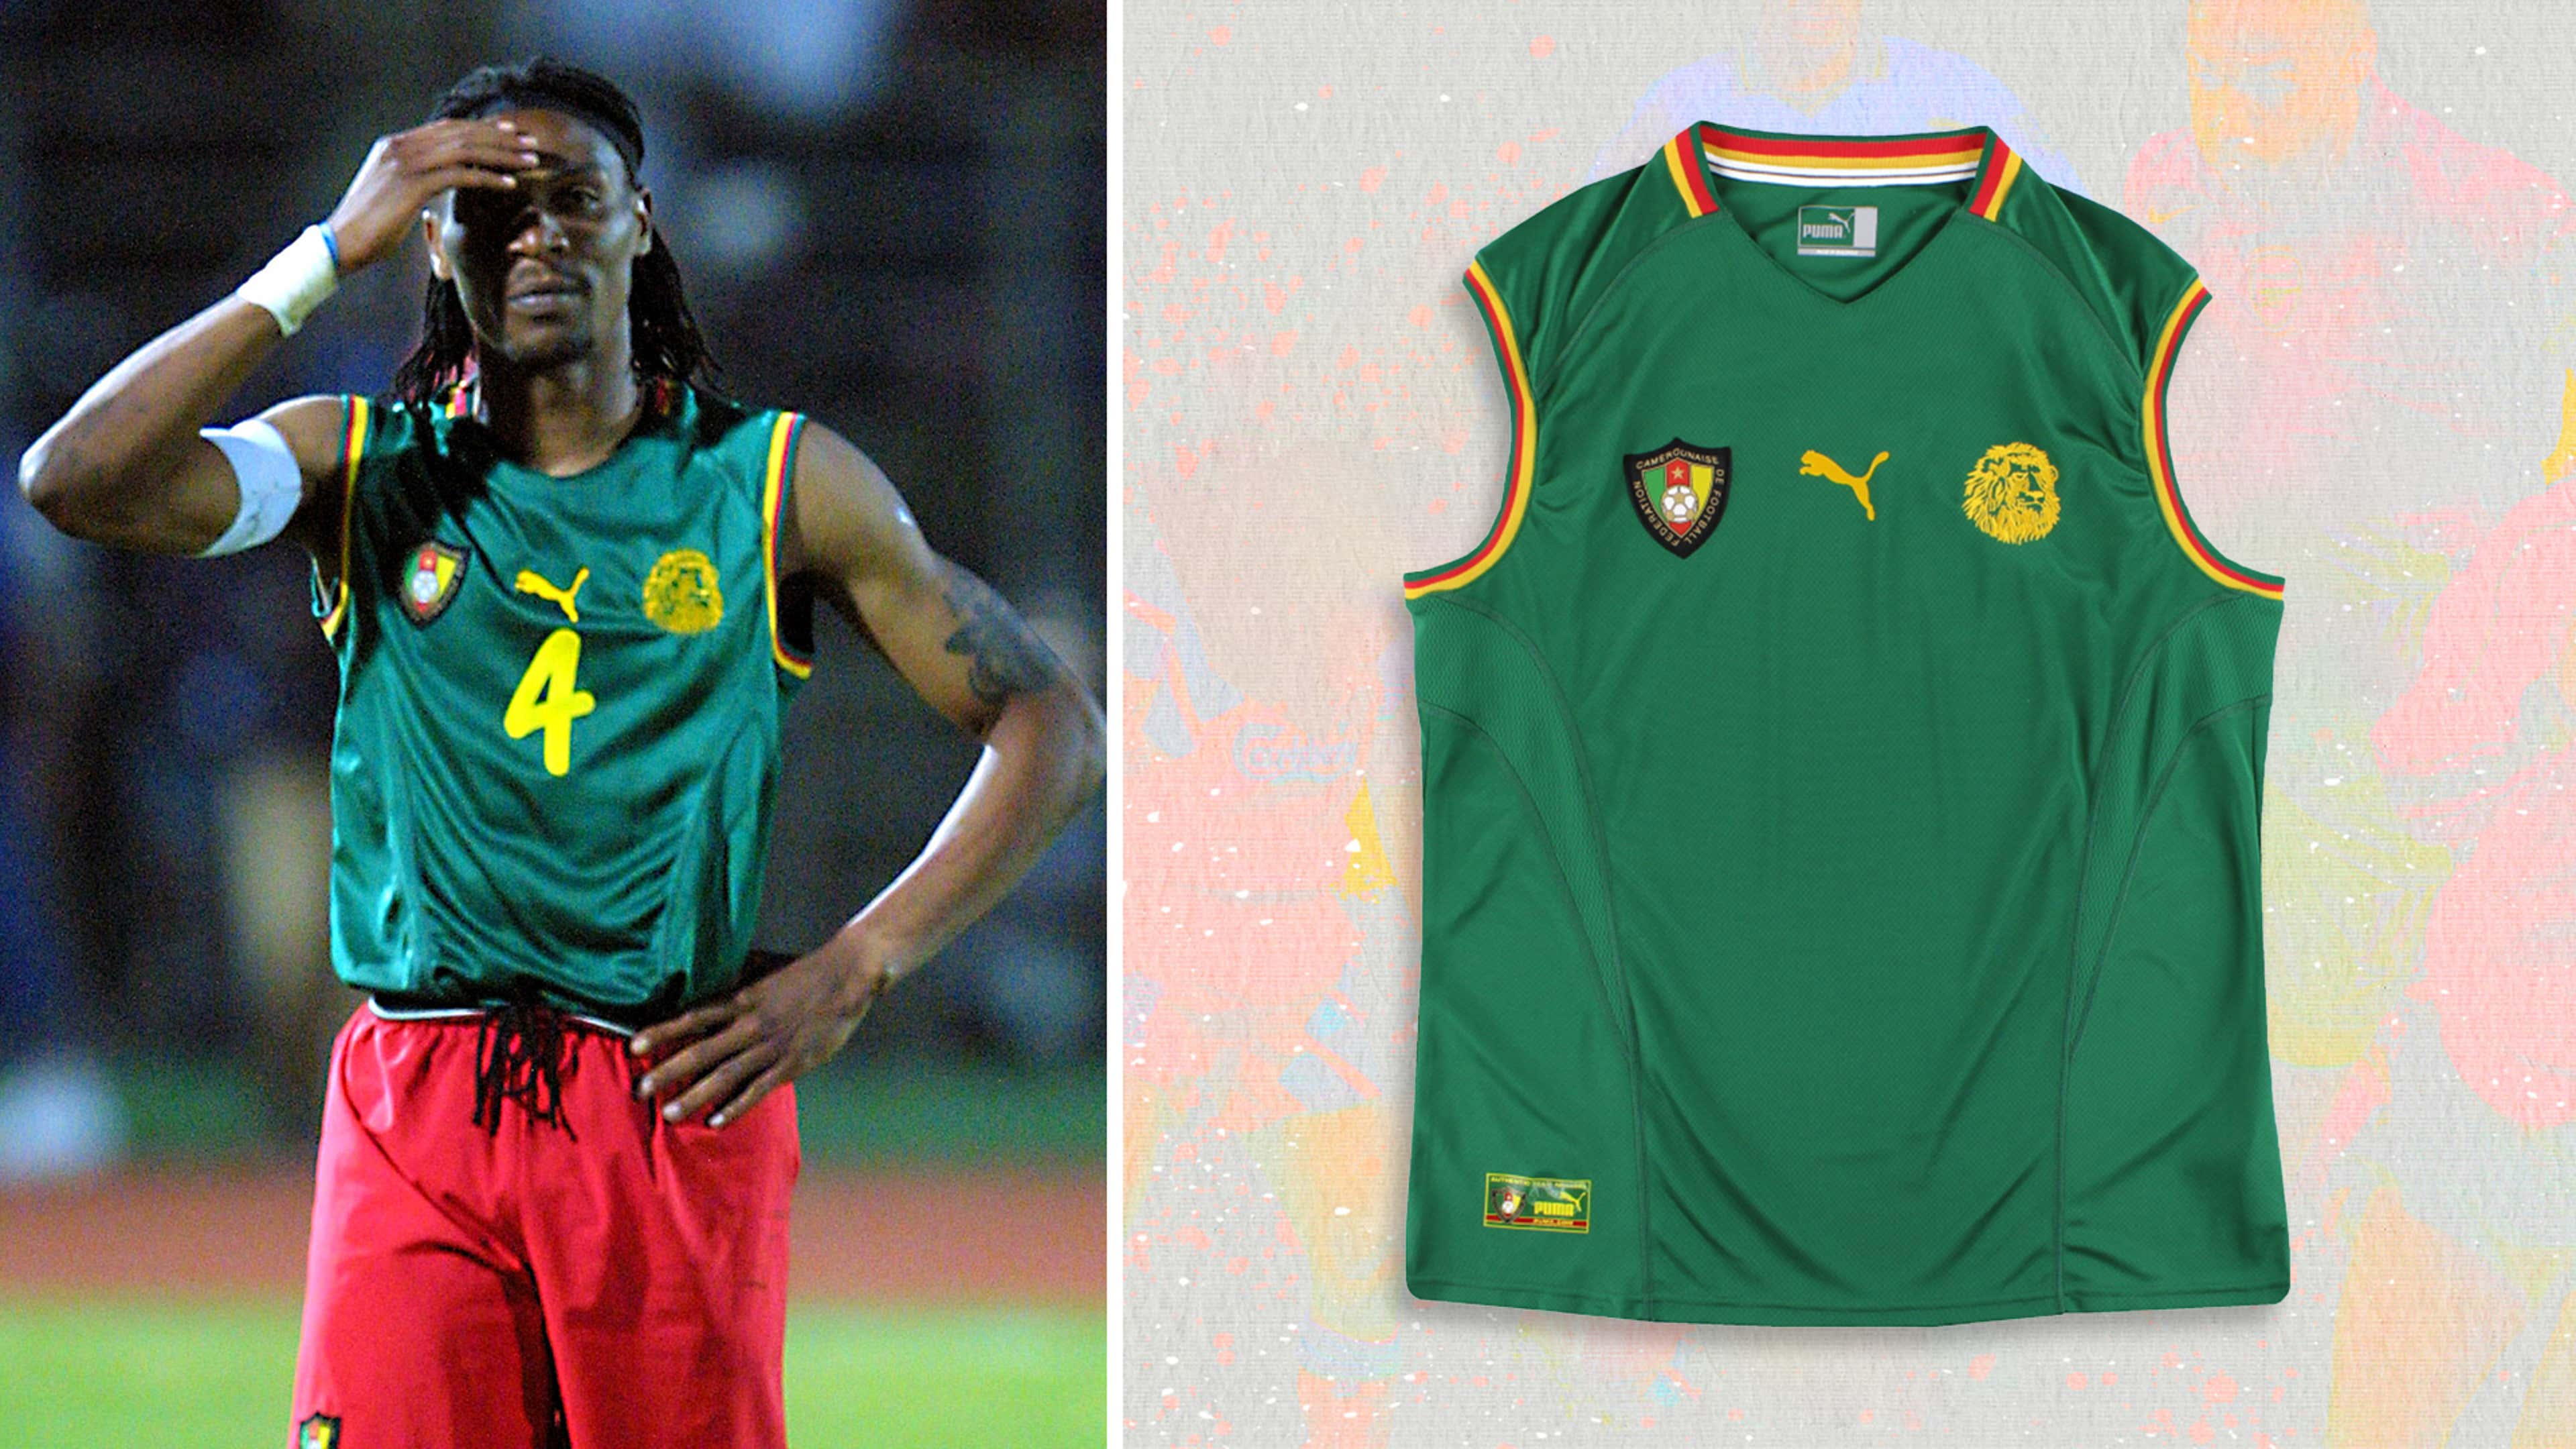 One of the most controversial #Retromix jerseys of the series: the